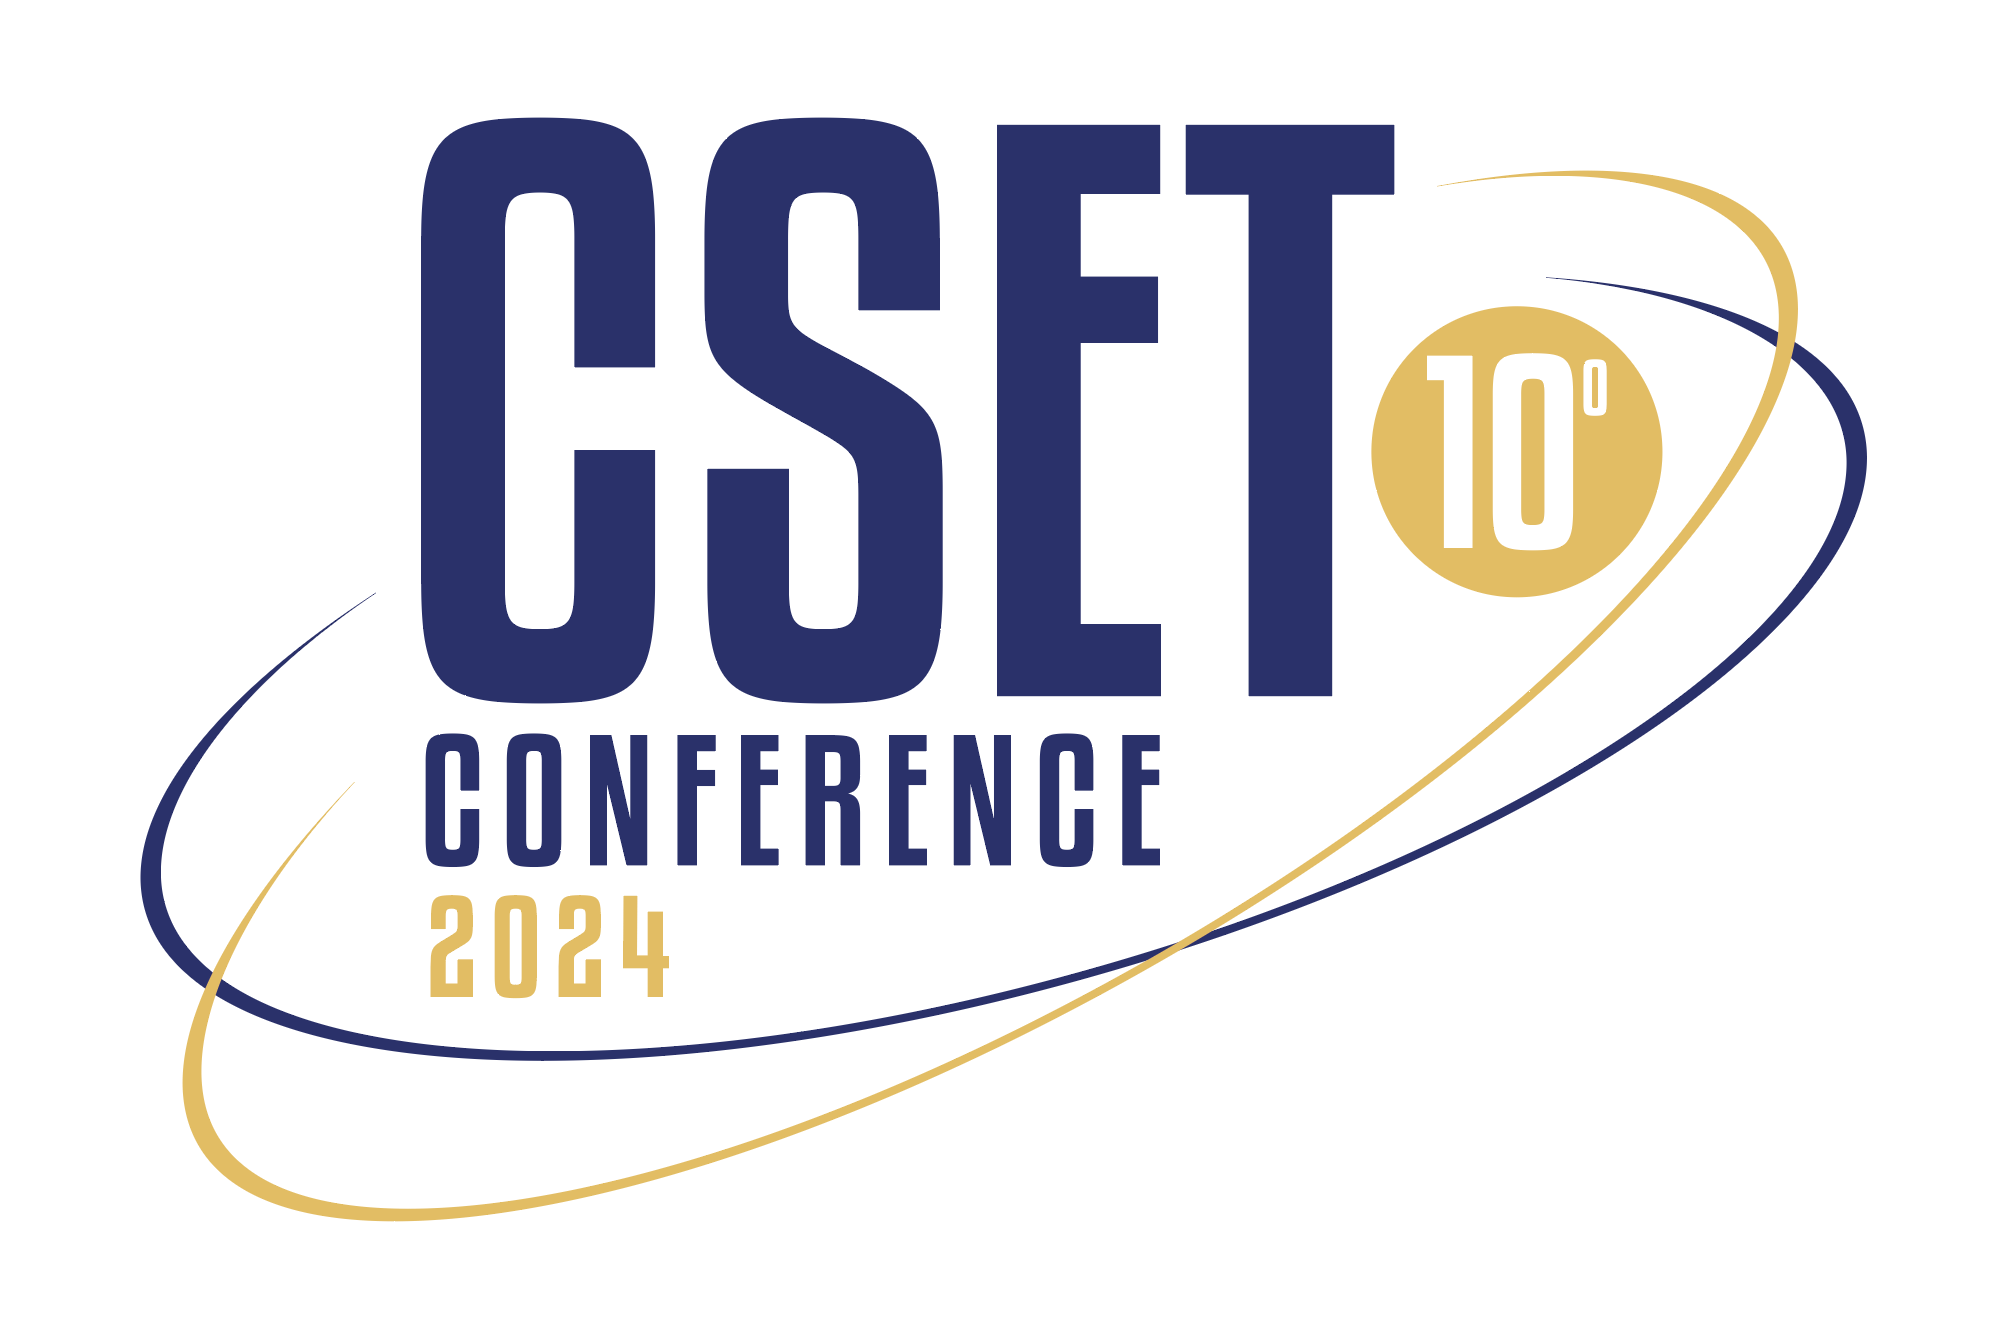 CSET Conference